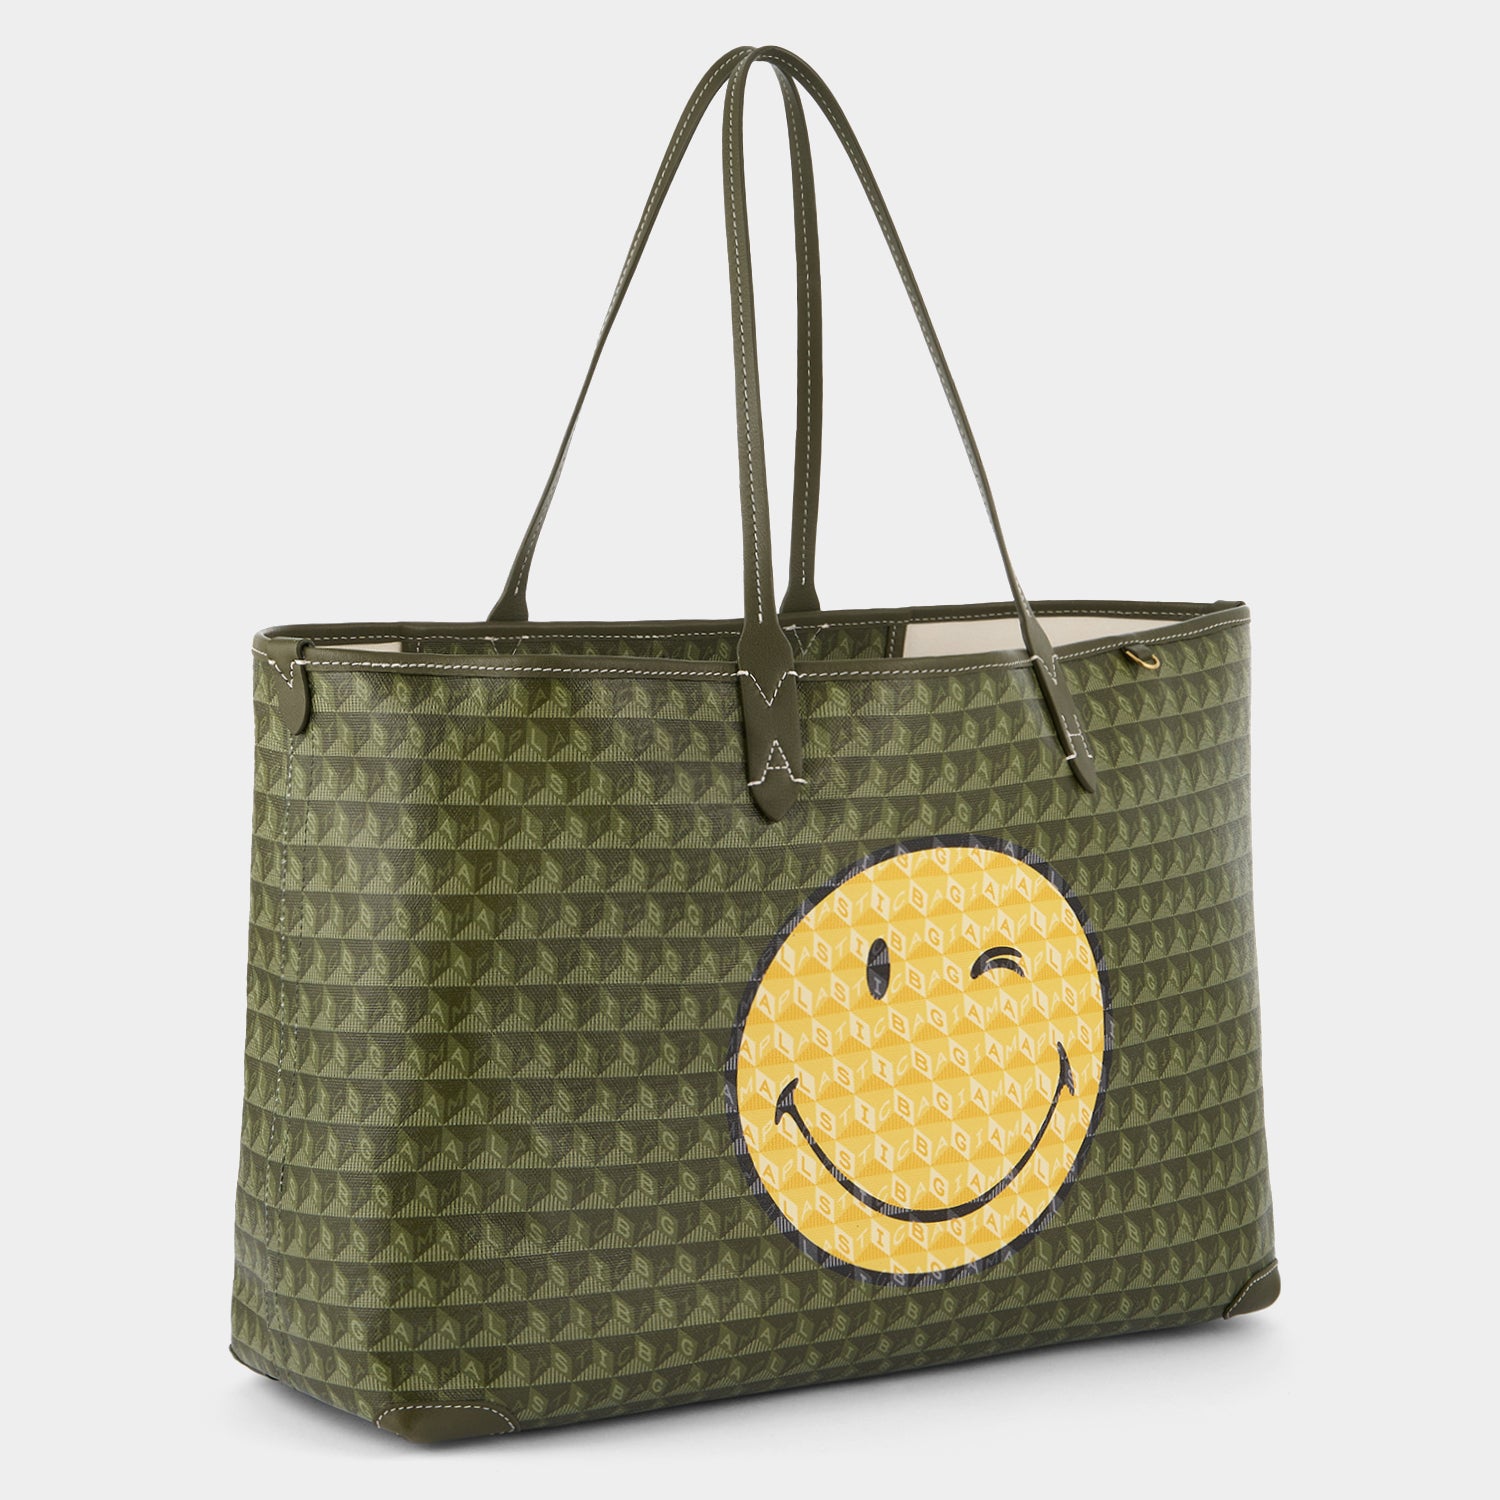 「I AM A Plastic Bag」 ウィンク トート -

                  
                    Recycled Coated Canvas in Fern -
                  

                  Anya Hindmarch JP
